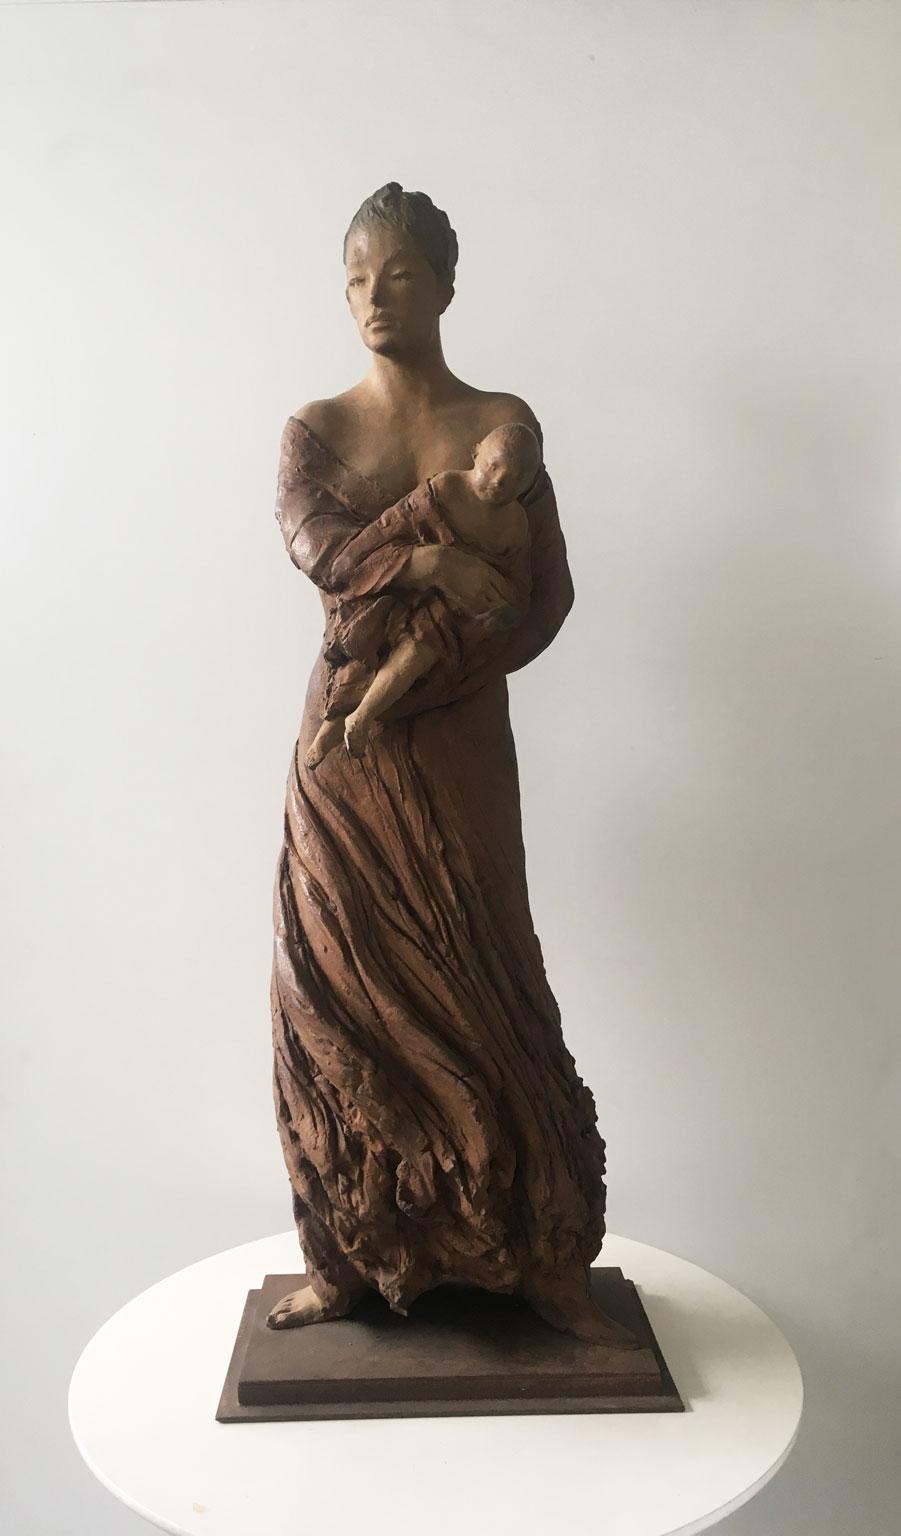 This is an intense bronze sculpture created by the Italian artist Ugo Riva, in 2006. Lost wax bronze on iron basement.
The title of this artwork is 